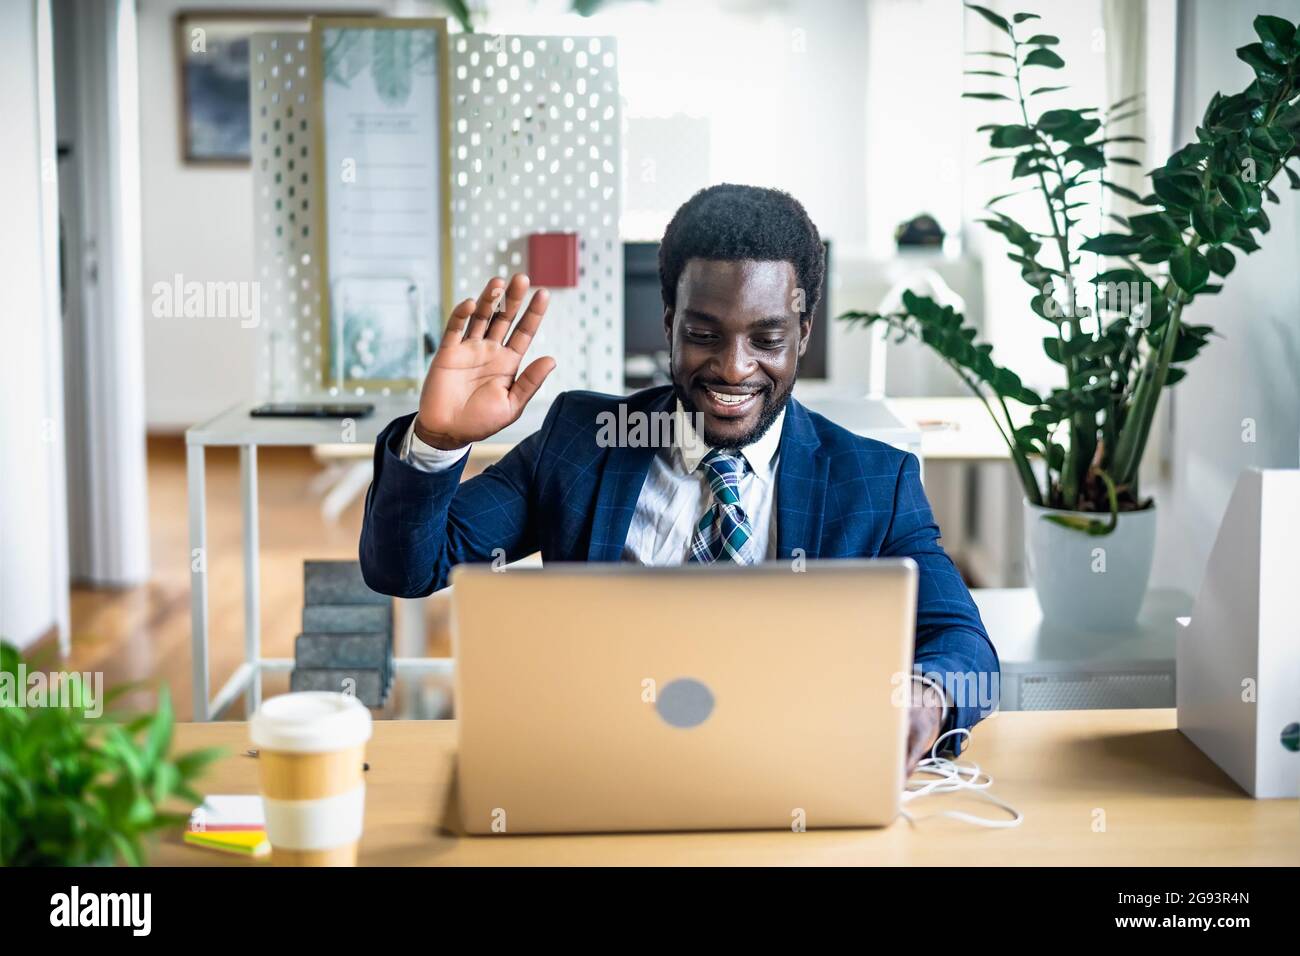 Business Afro man doing online video conference on laptop inside modern office Stock Photo